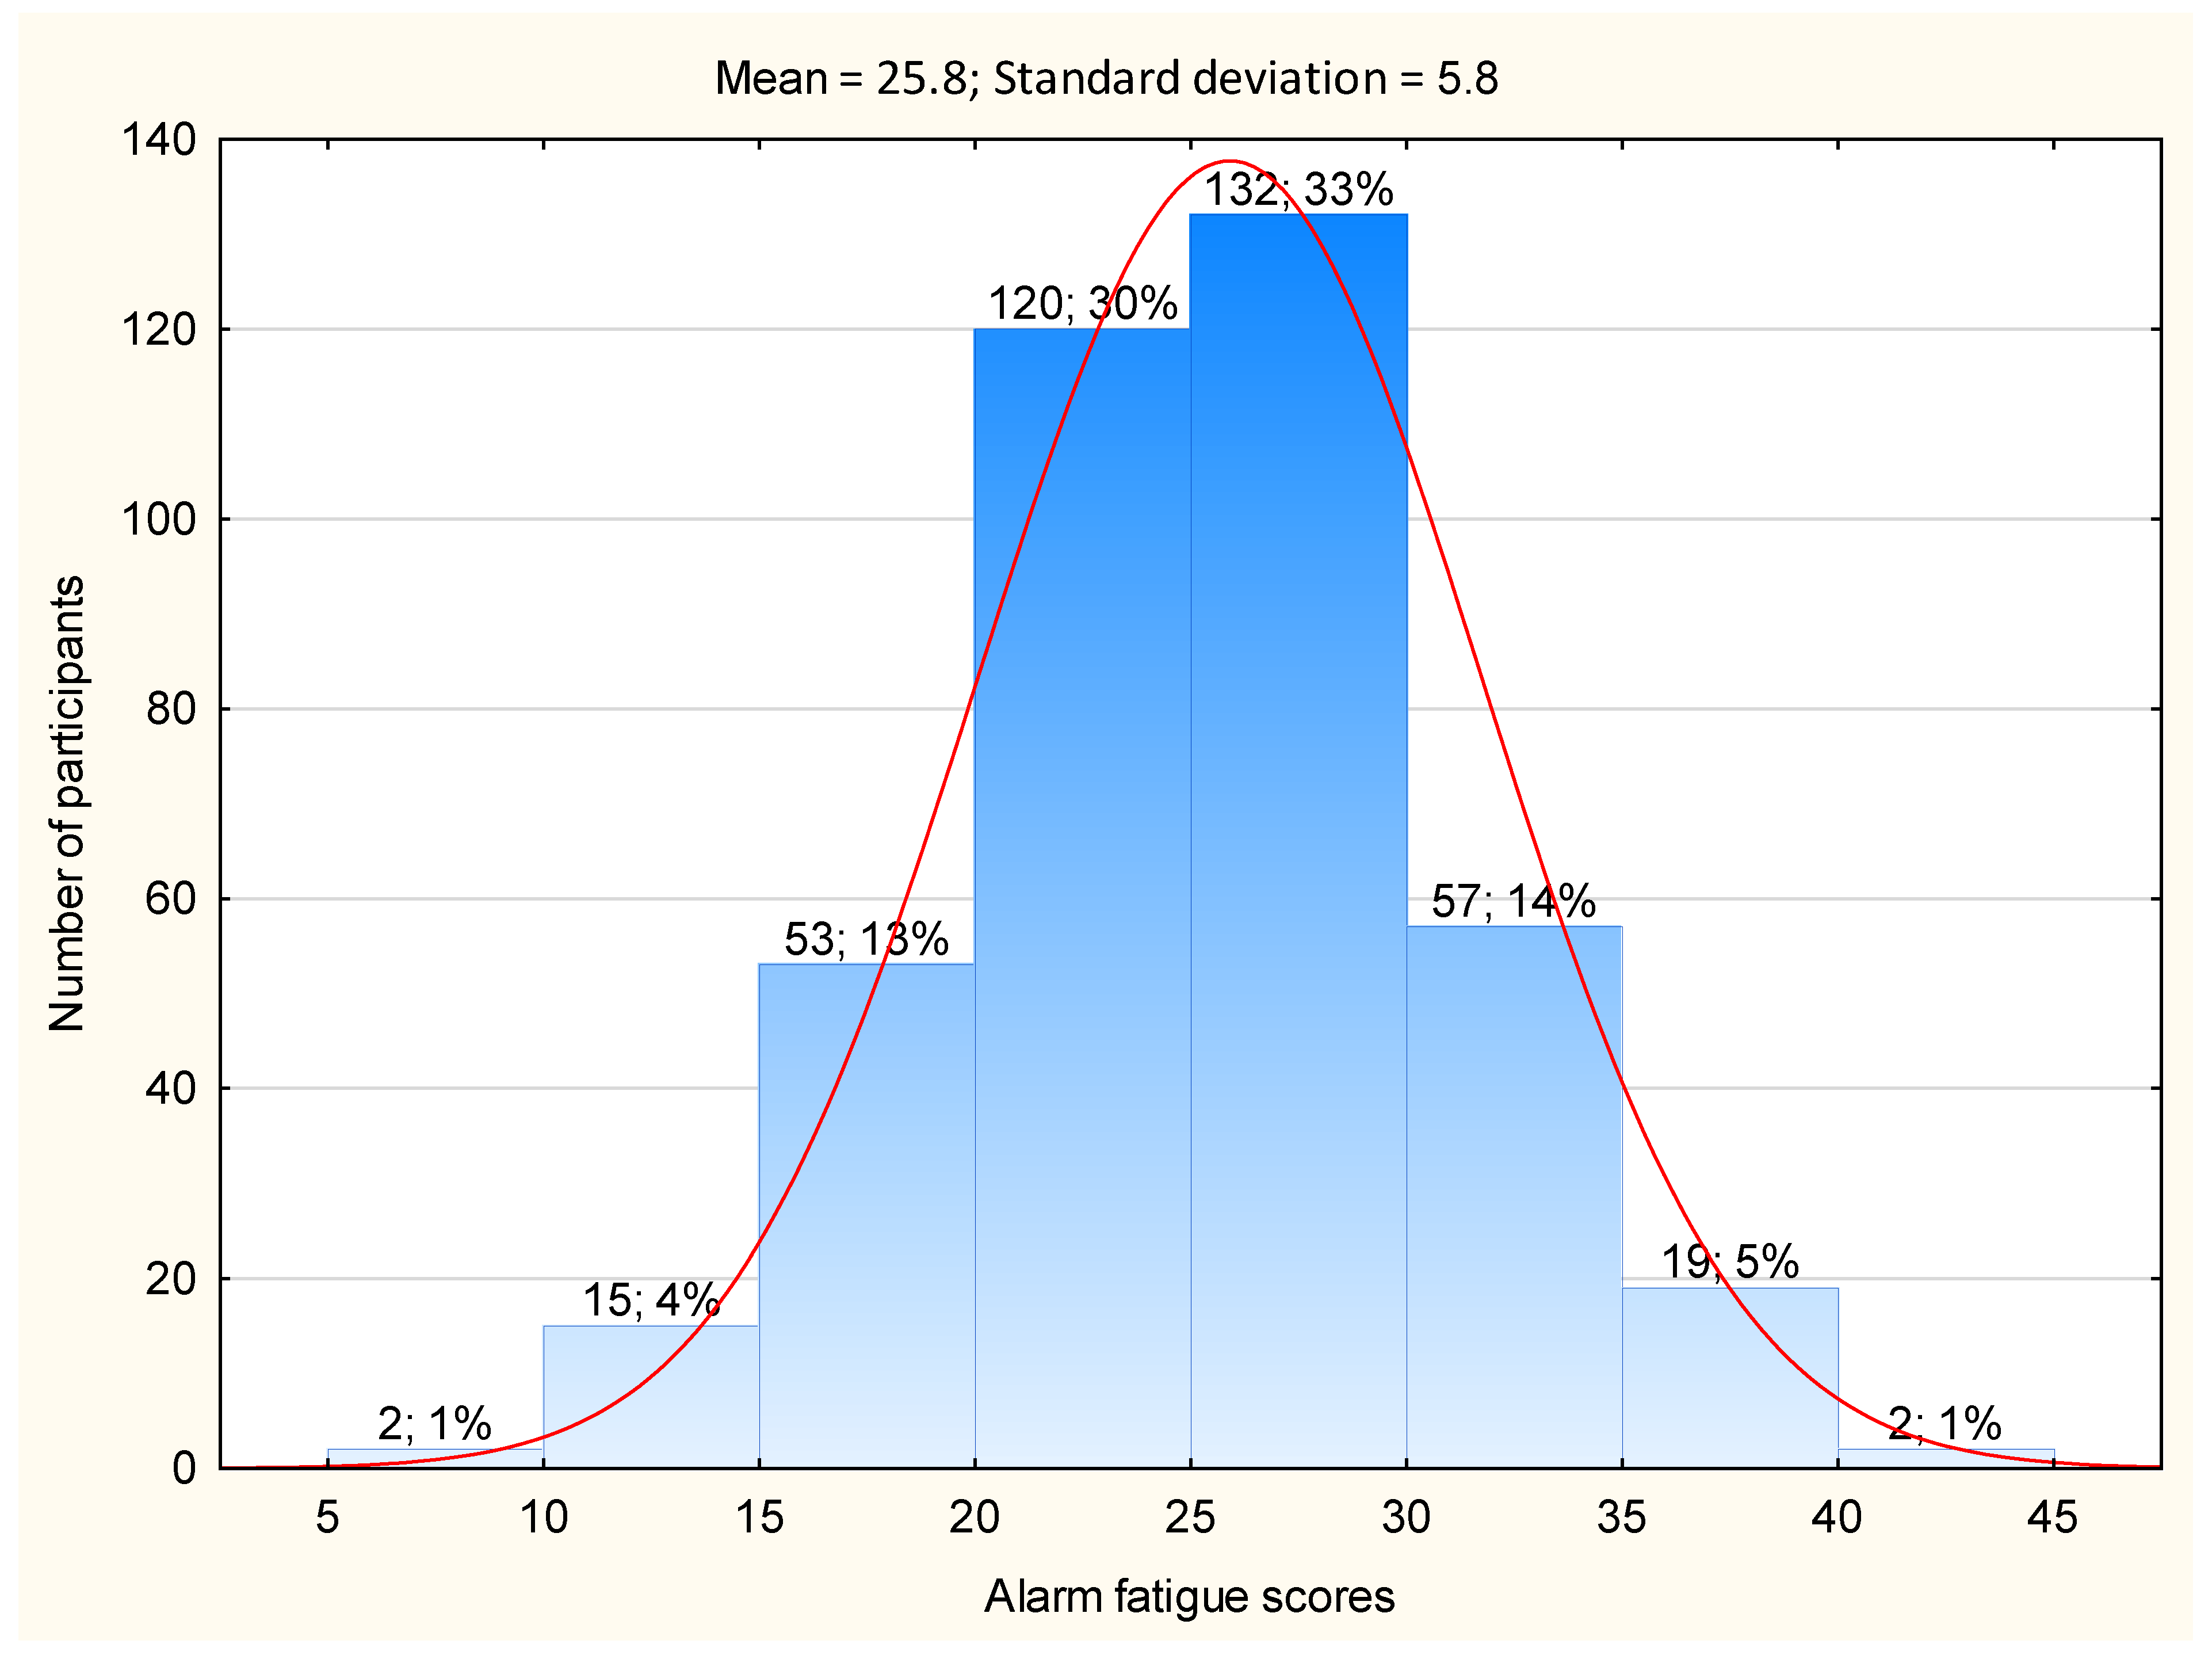 Response distribution for the average height of Lithuanian women